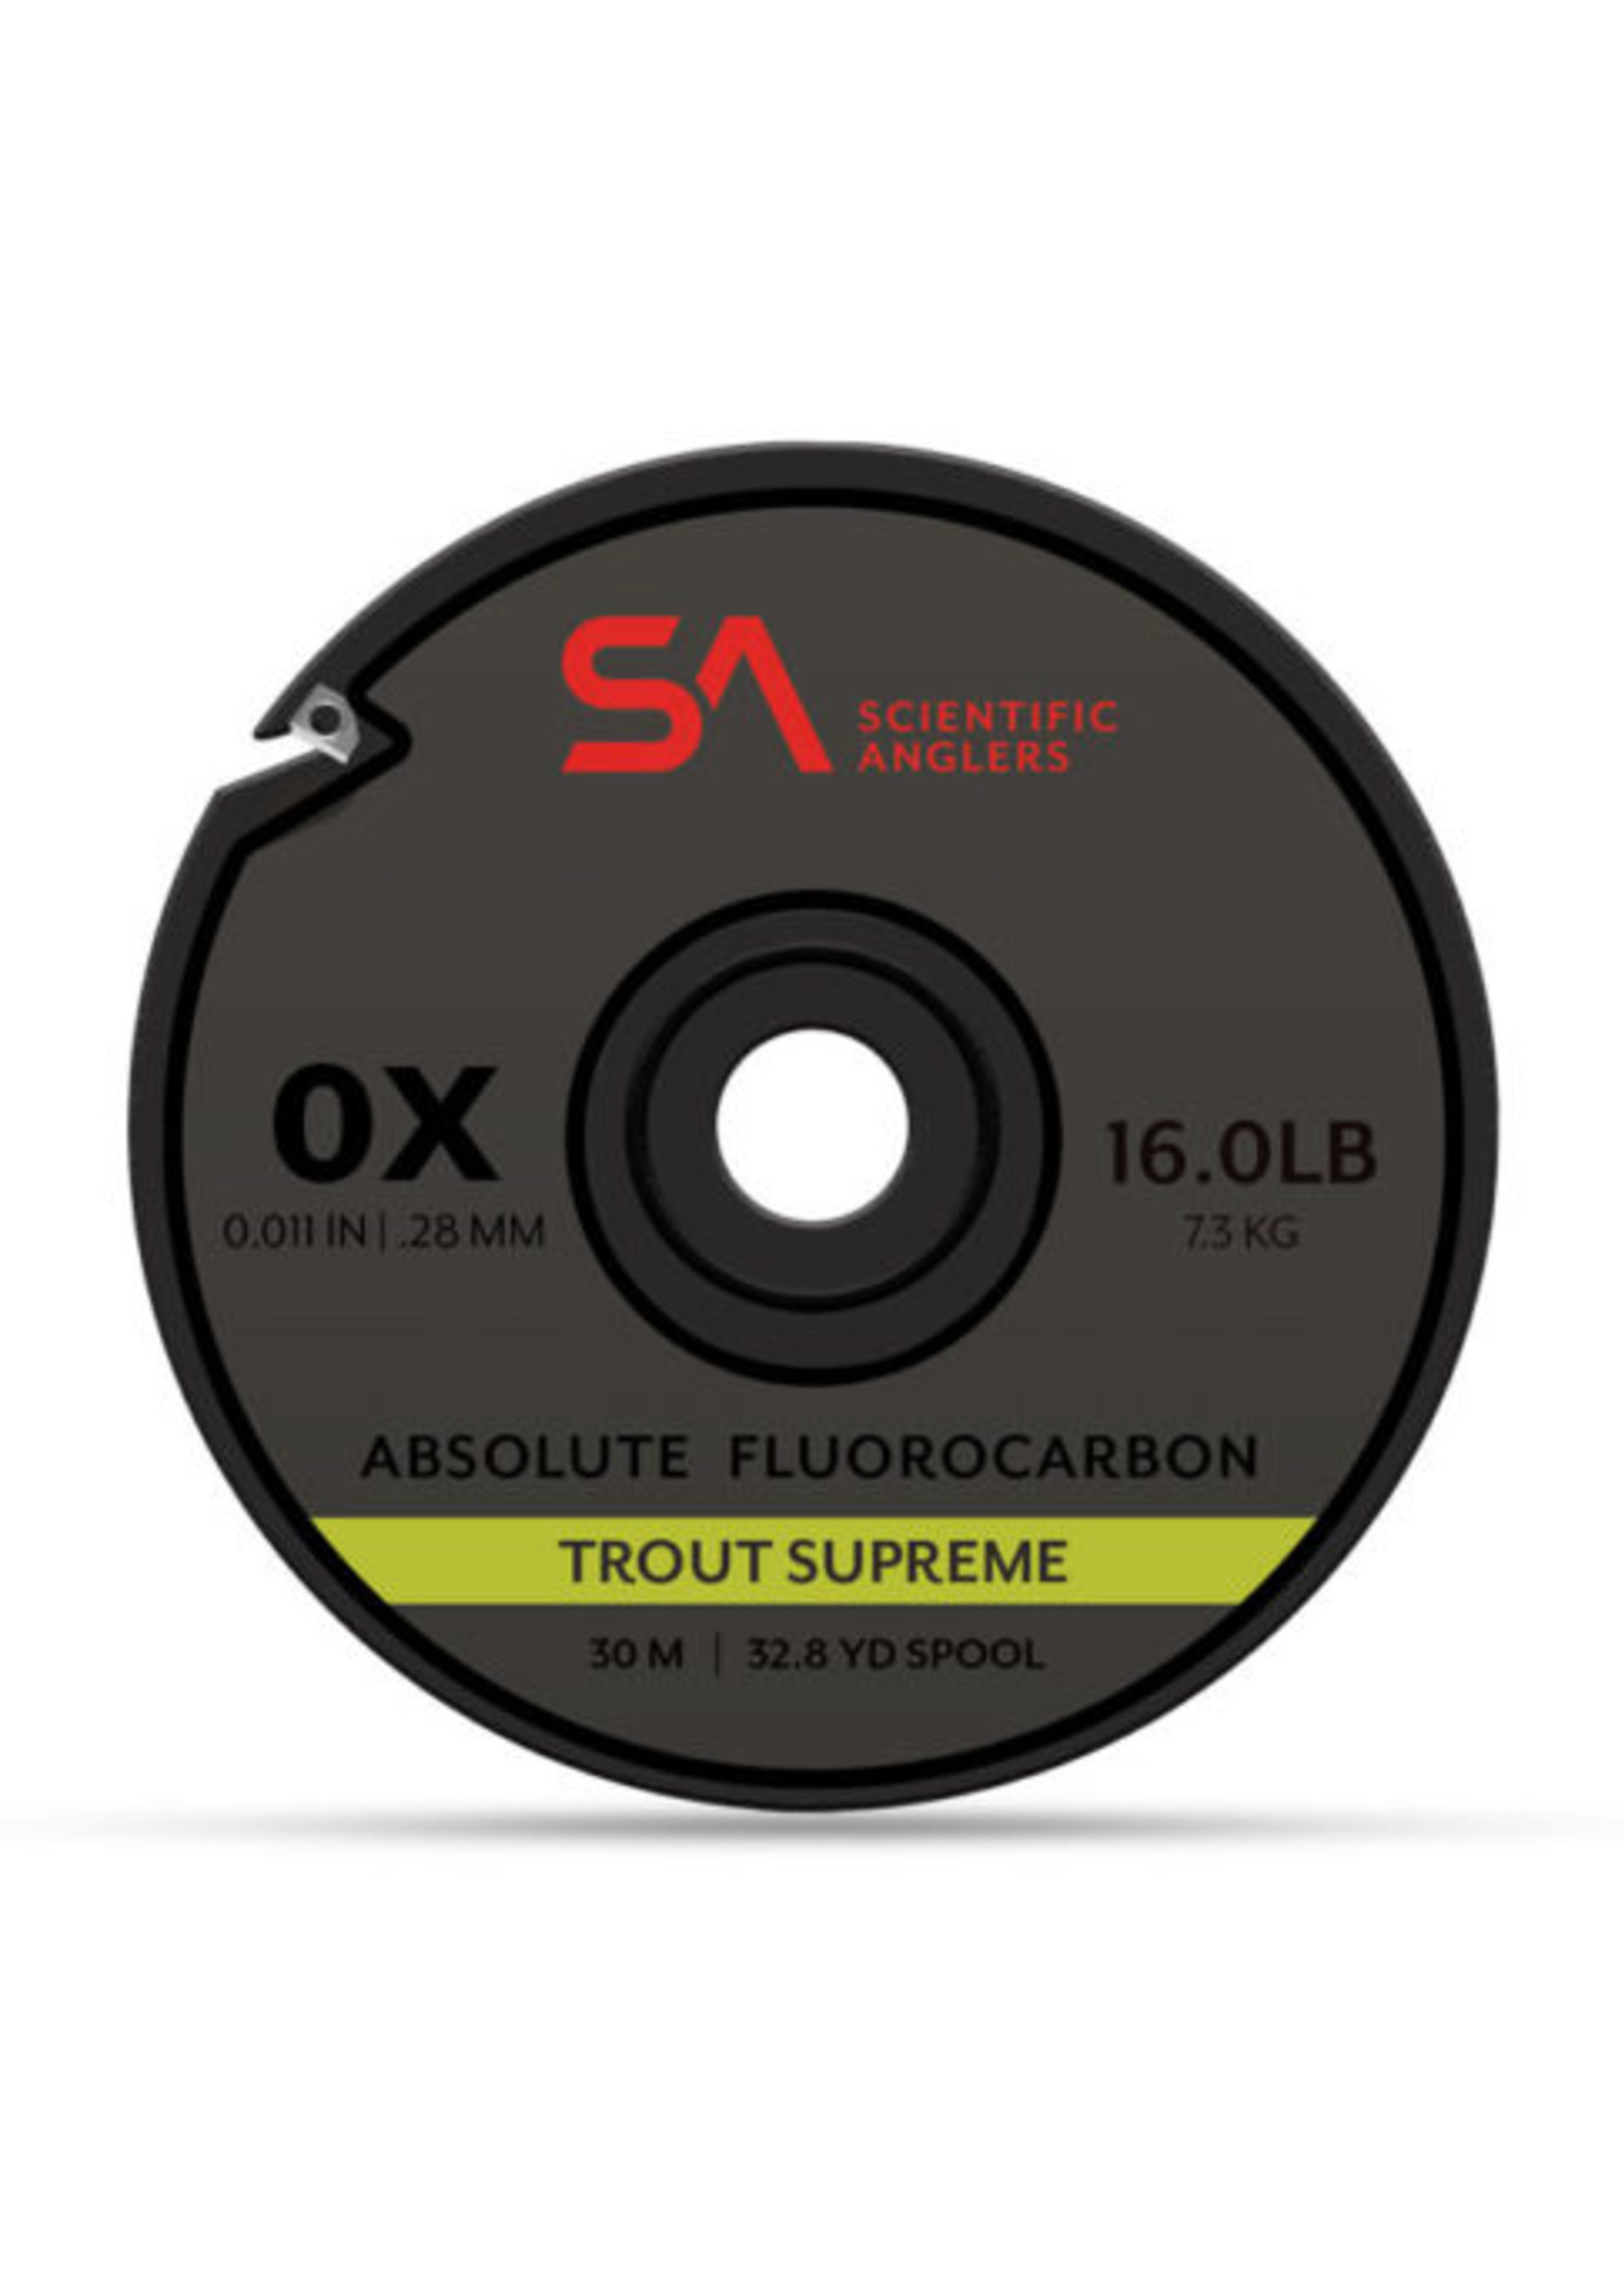 Scientific Anglers SA Absolute Fluorocarbon Trout Supreme Tippet-5x